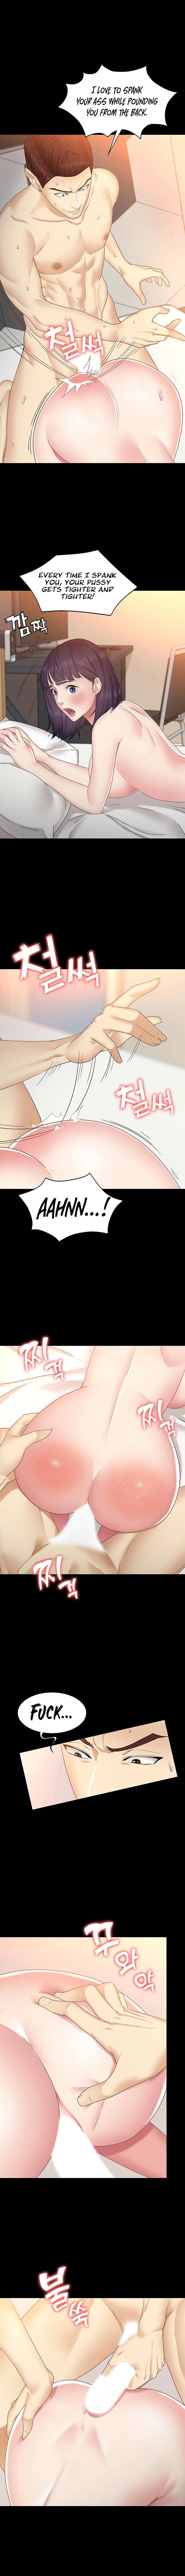 shes-my-younger-sister-but-its-okay-chap-3-5